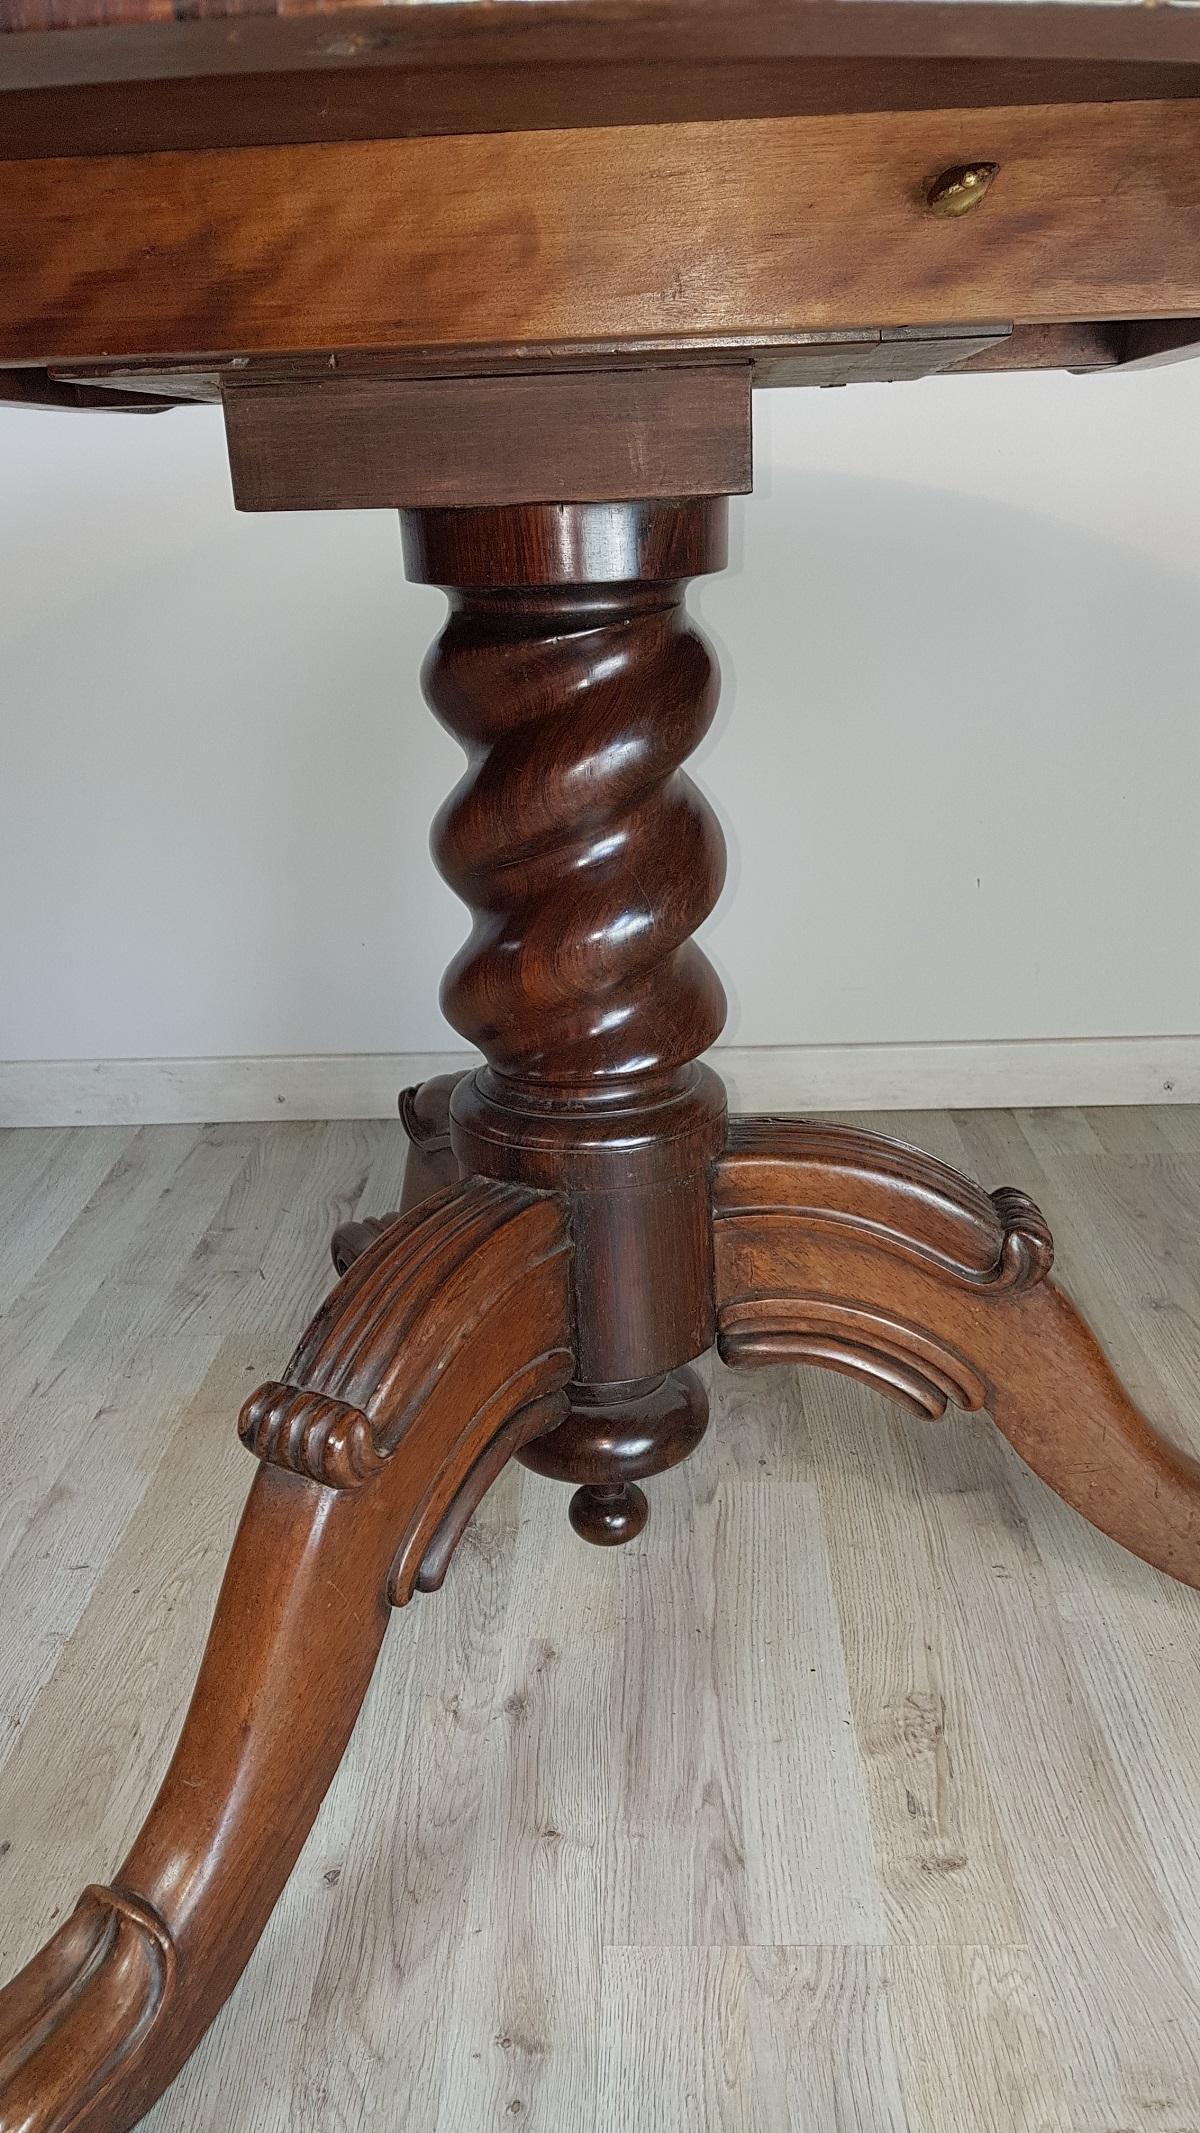 Beautiful important antique table made in the mid-1800s in mahogany. Veneered strip to create contrasting wood grain. Table with elegant turned central leg, the top is characterized by a narrow and comfortable band at the seat. The particularity of